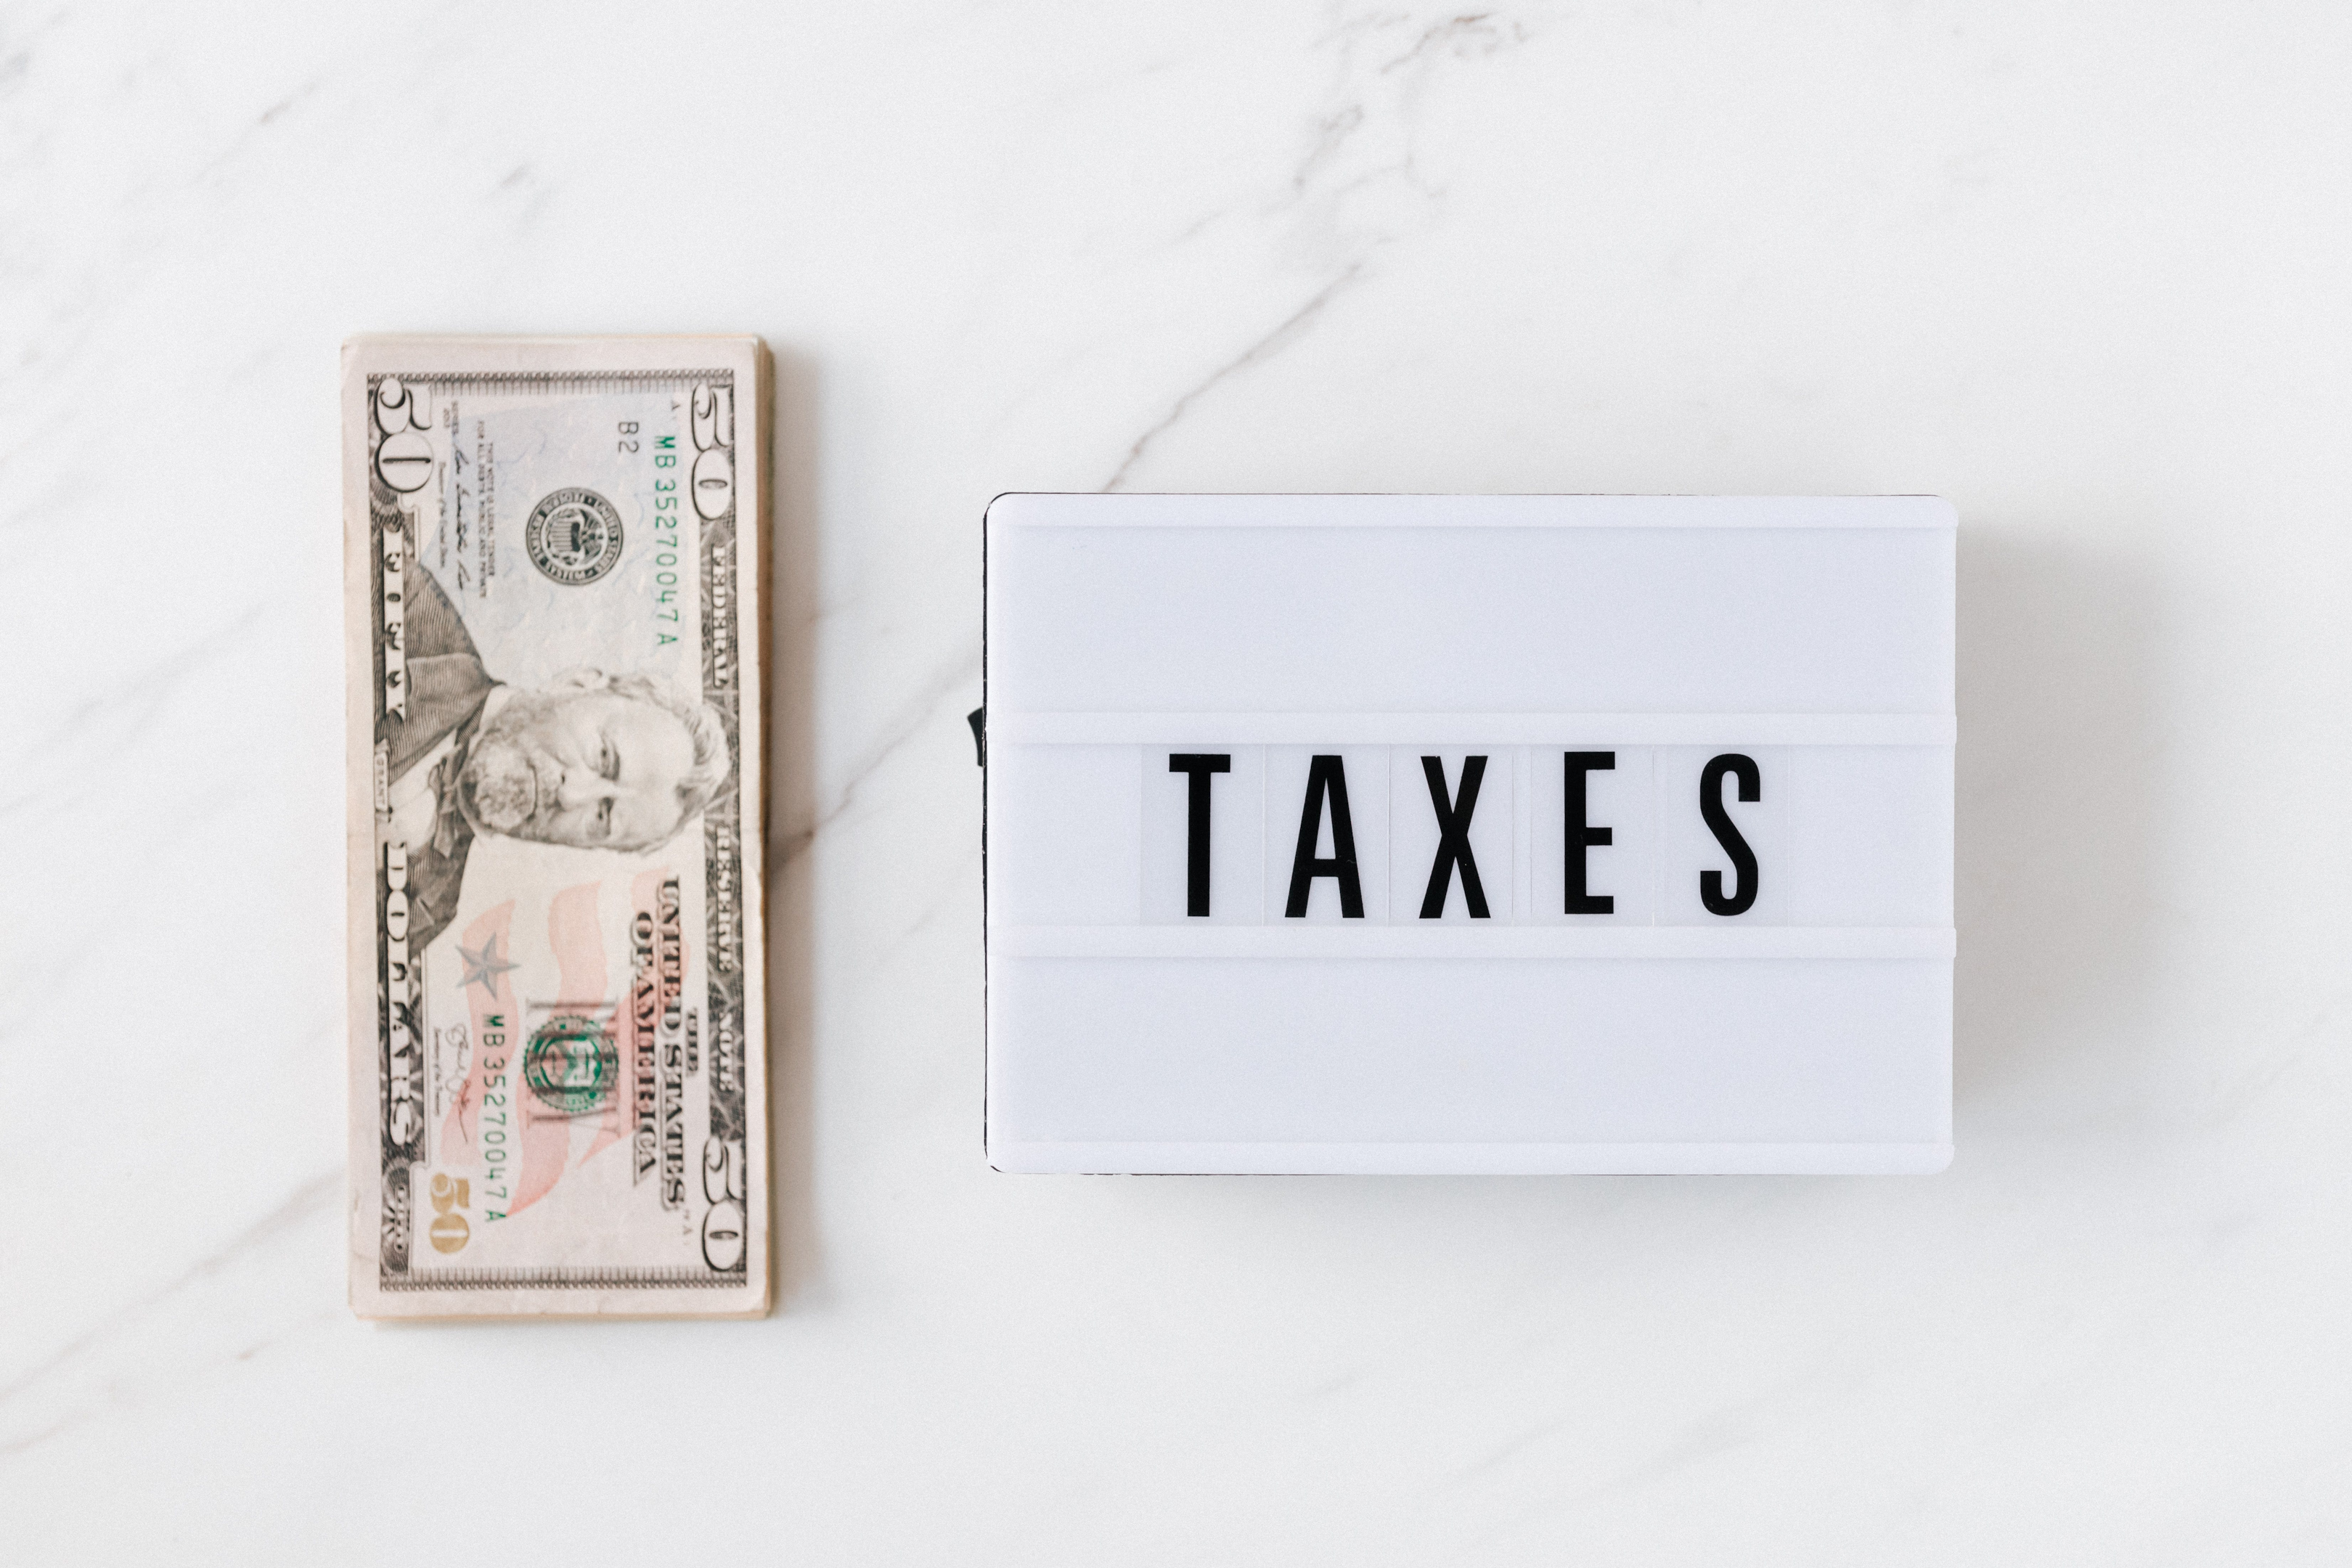 If you have to pay taxes on taxable income, that reduces the amount you have to invest.